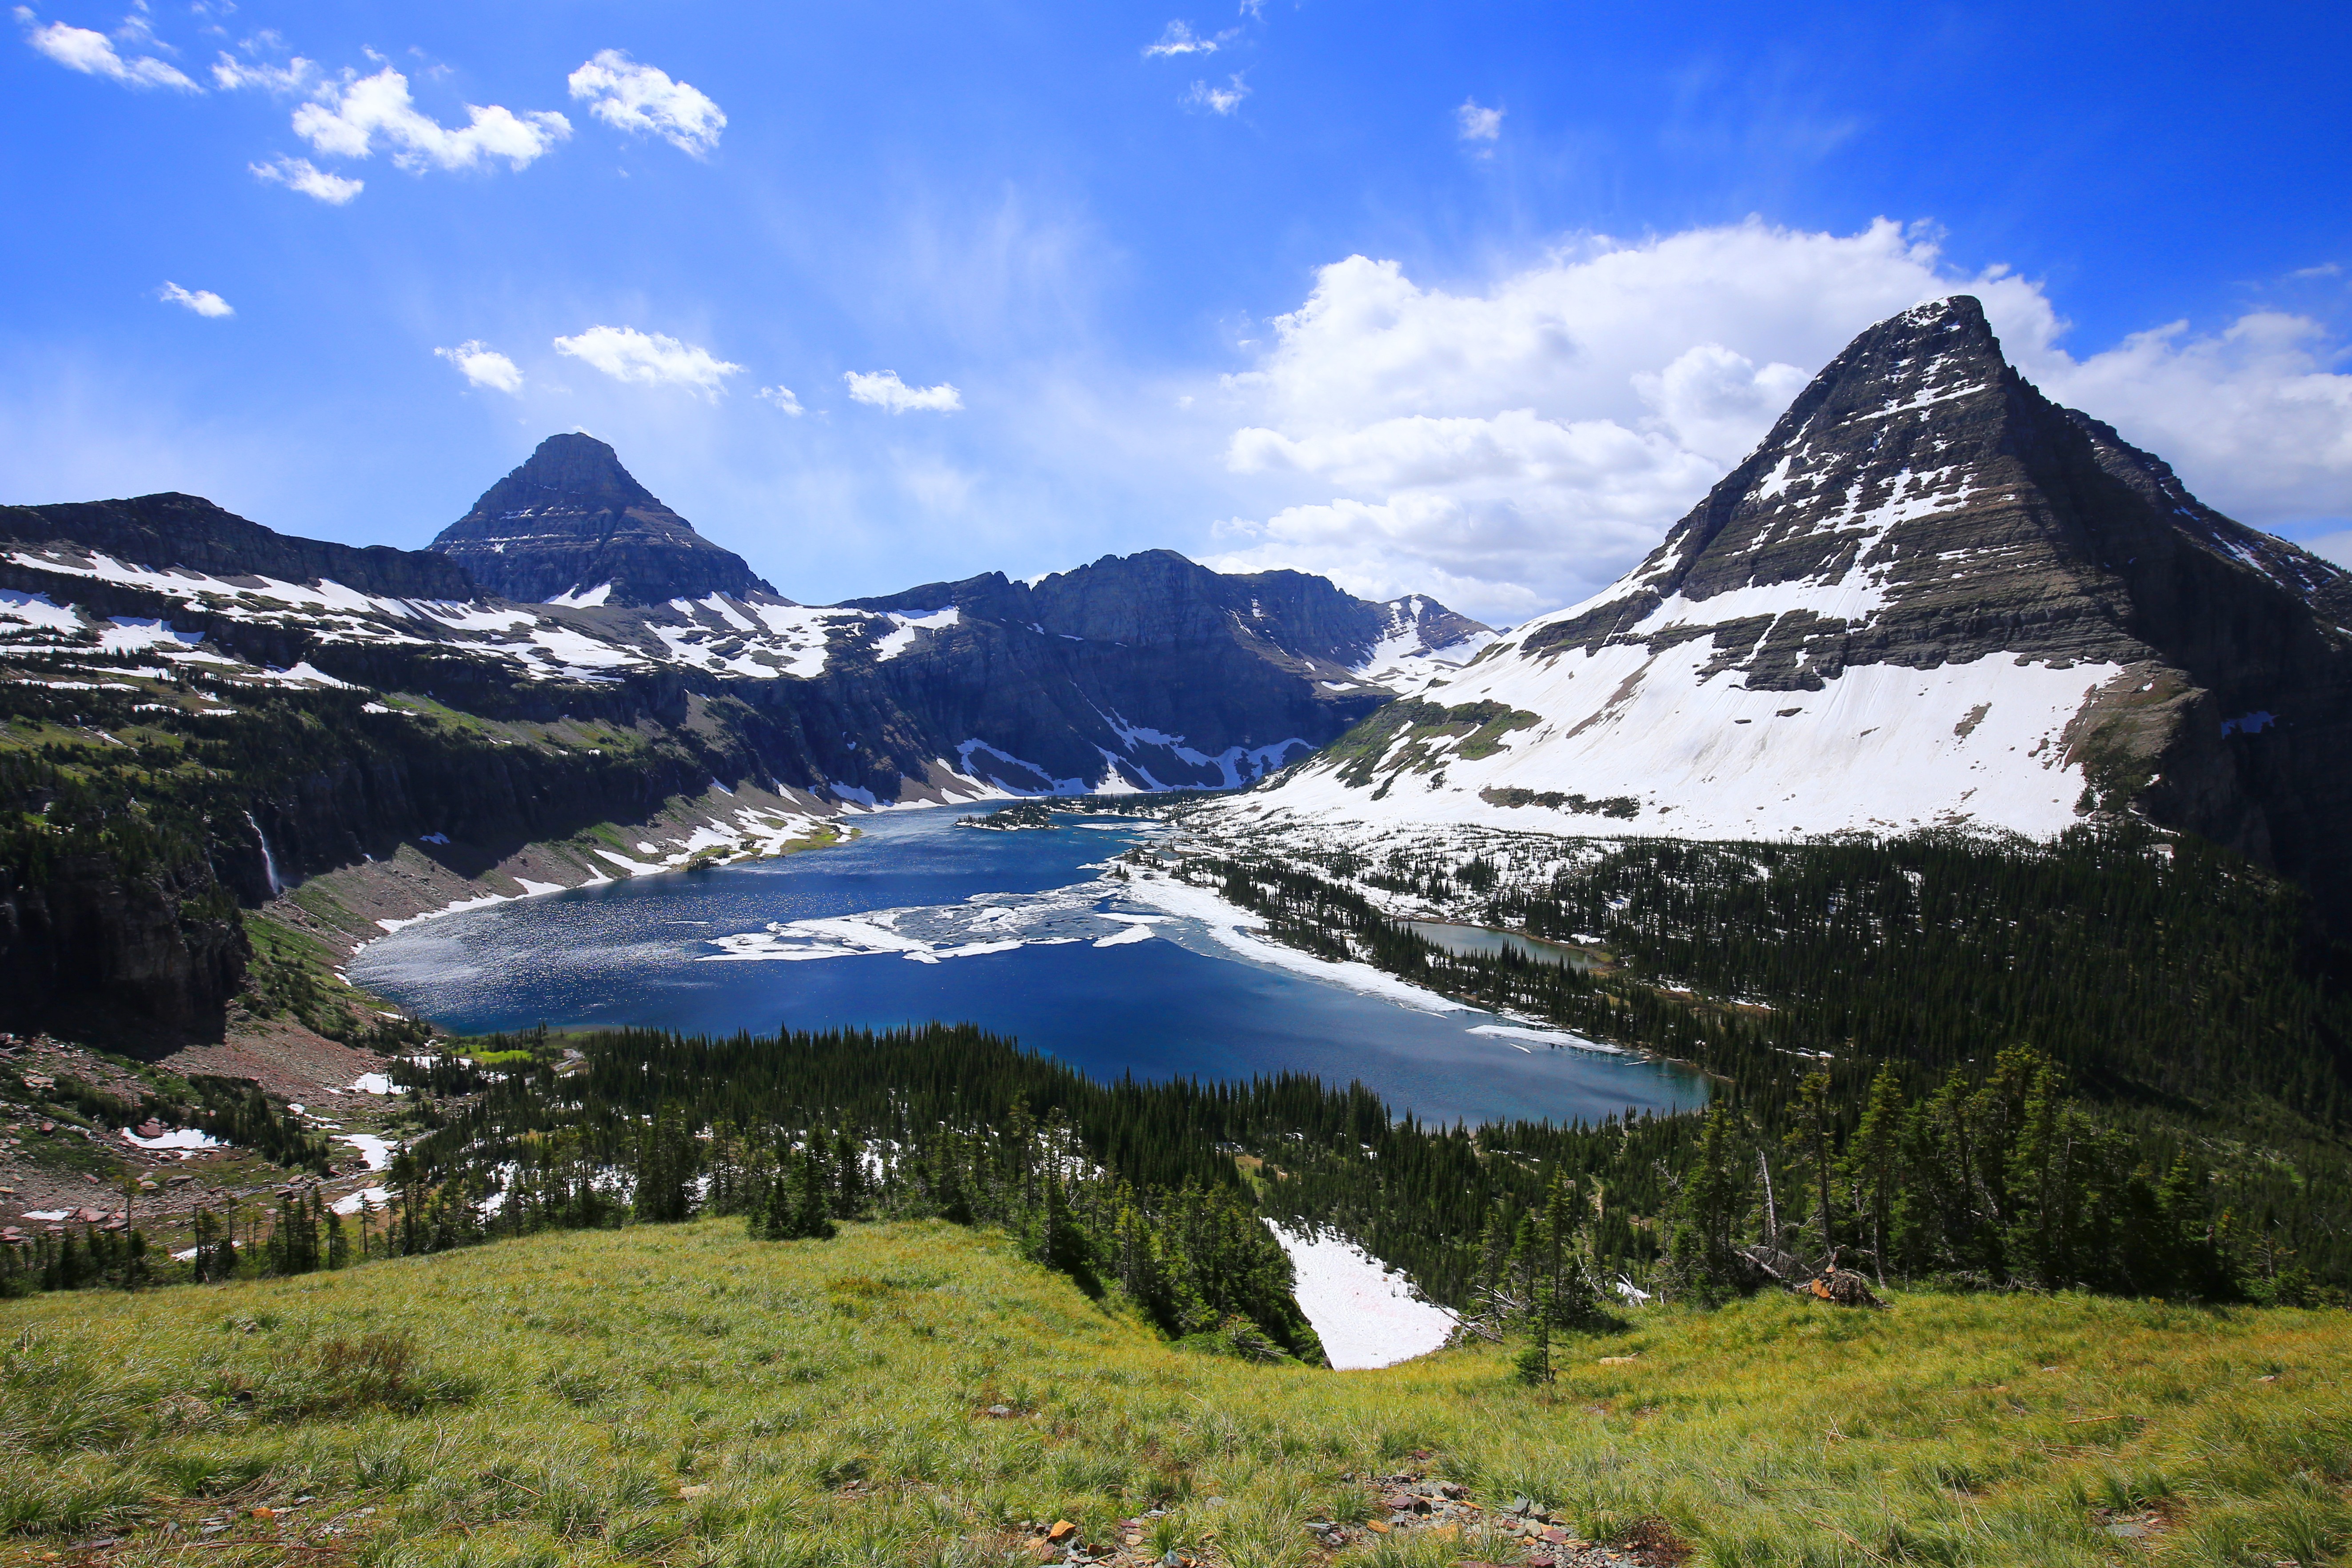 Bearhat Mountain (right), Reynolds Mountain (left) and Hidden Lake in Glacier National Park, Montana. Photo taken by Tobias on June 19, 2015.